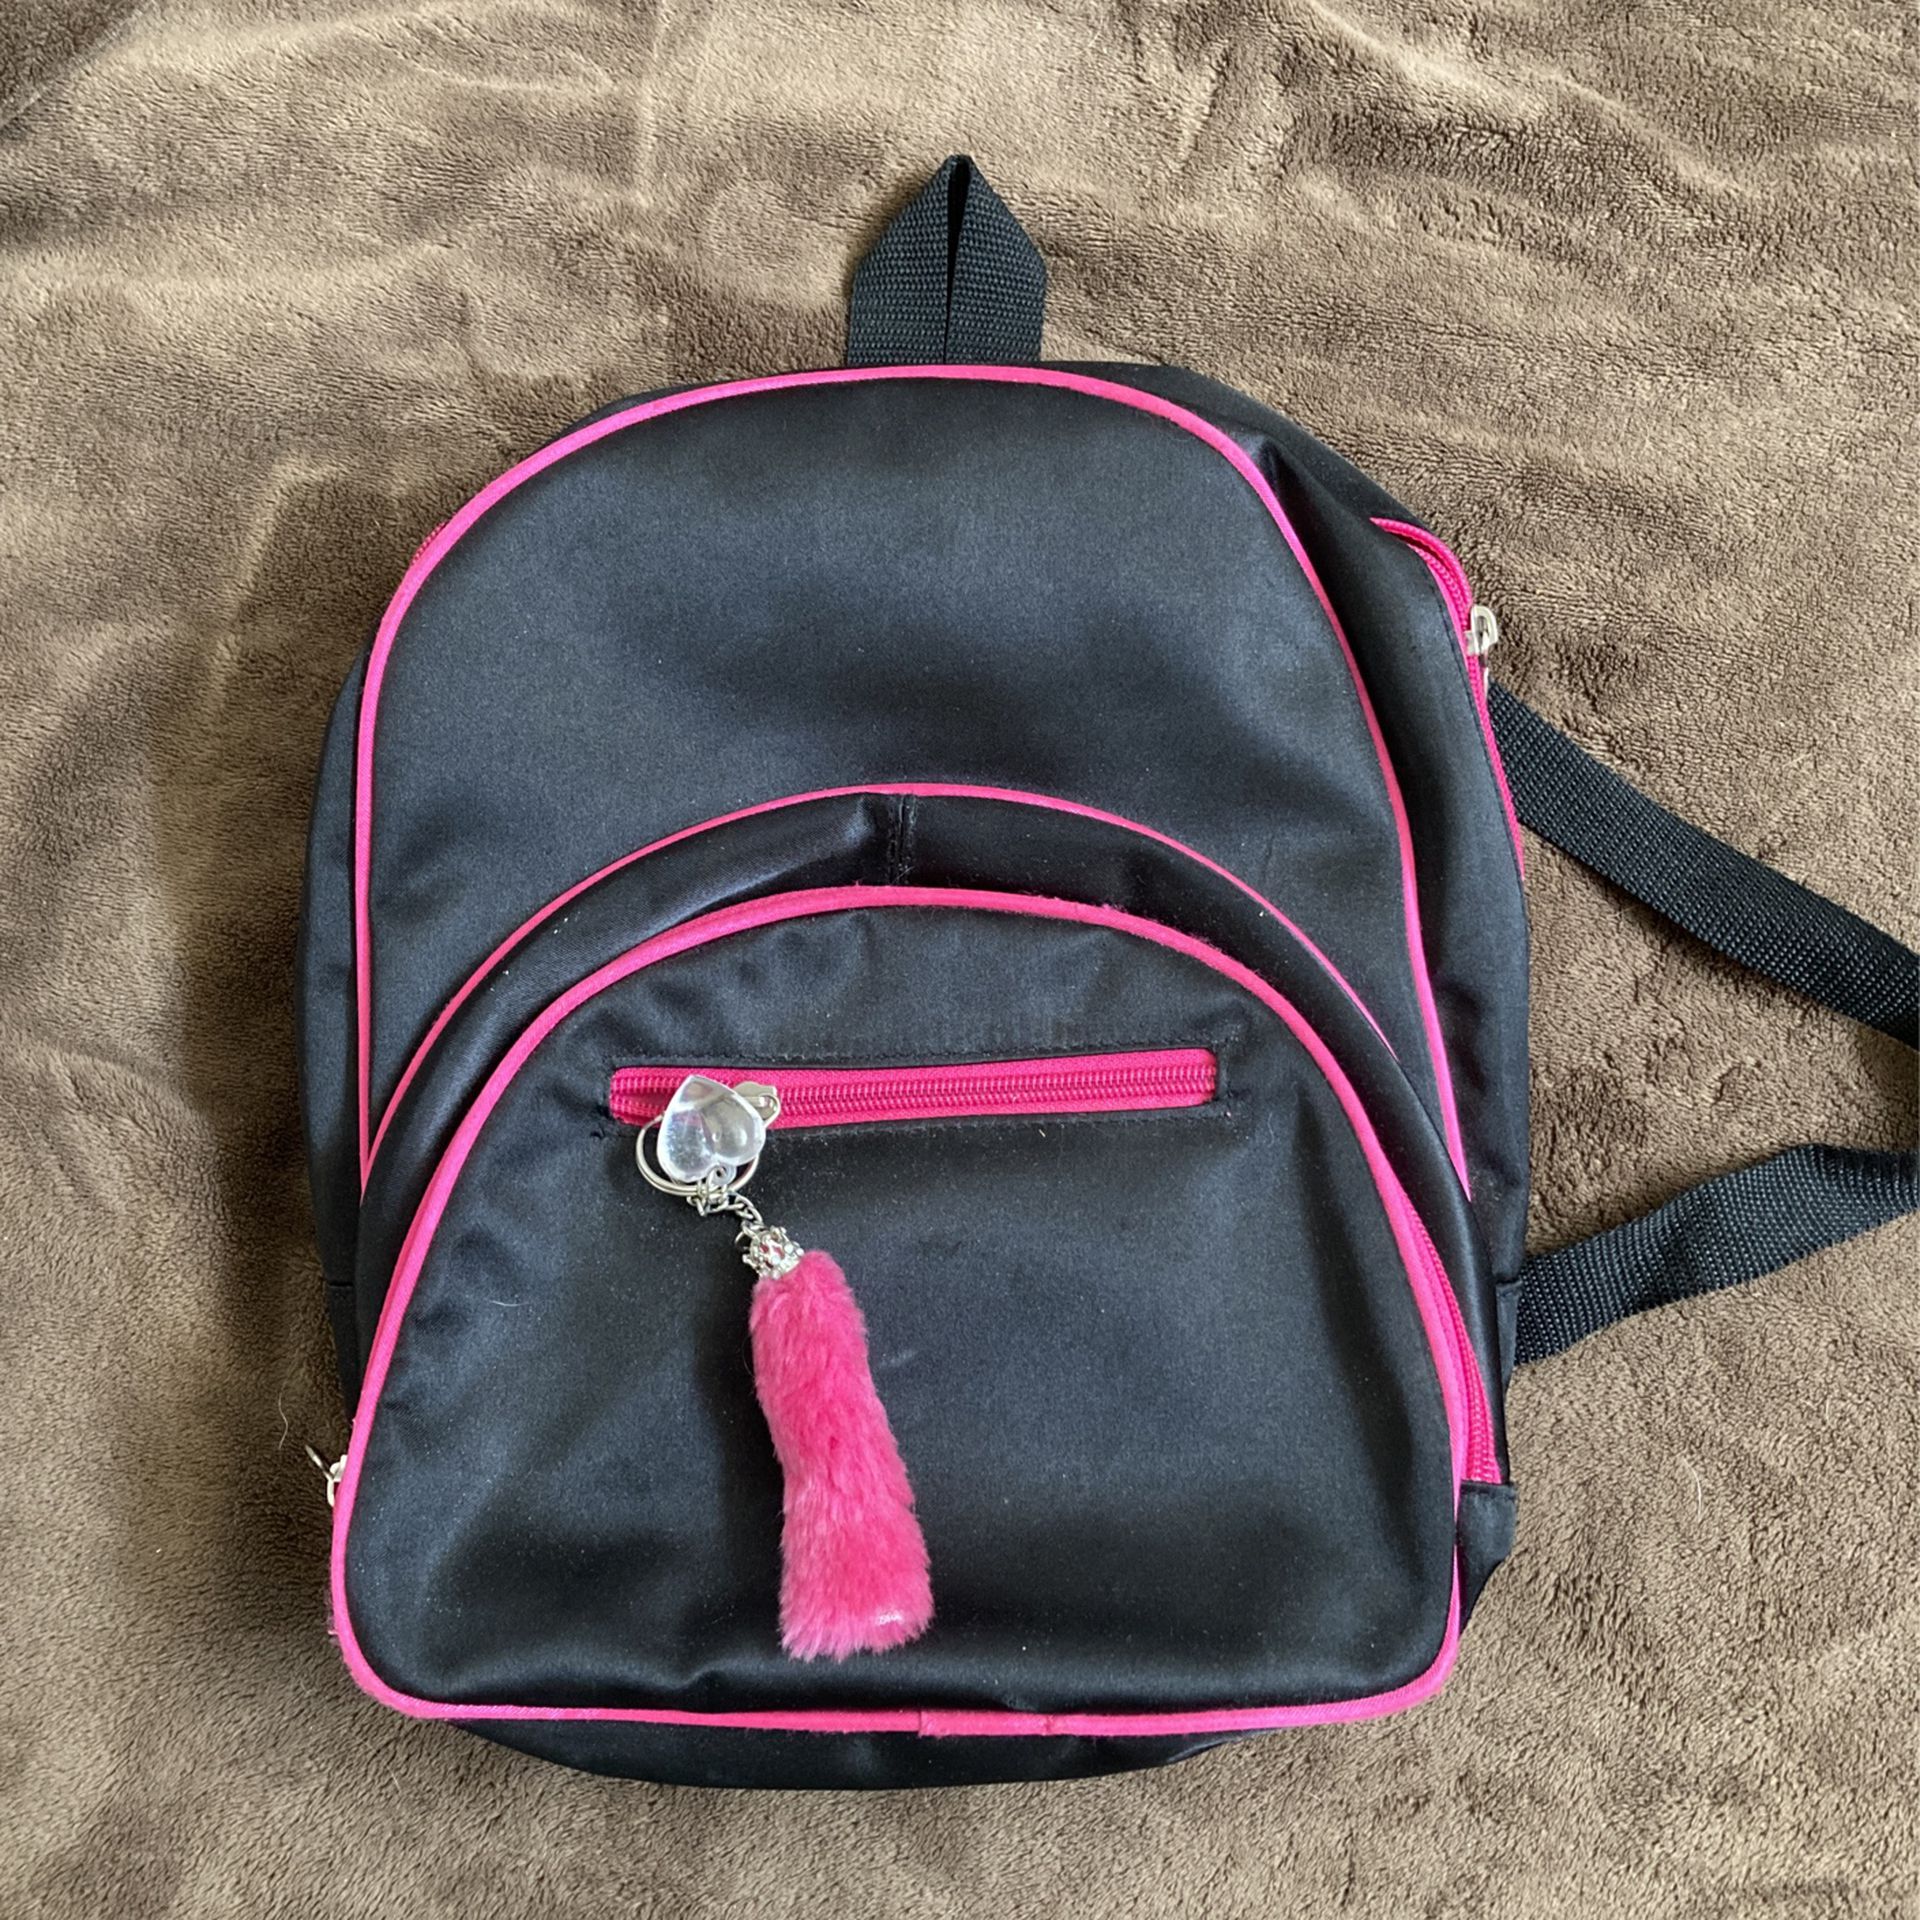 Child Size Backpack Good For Ages 3-7 